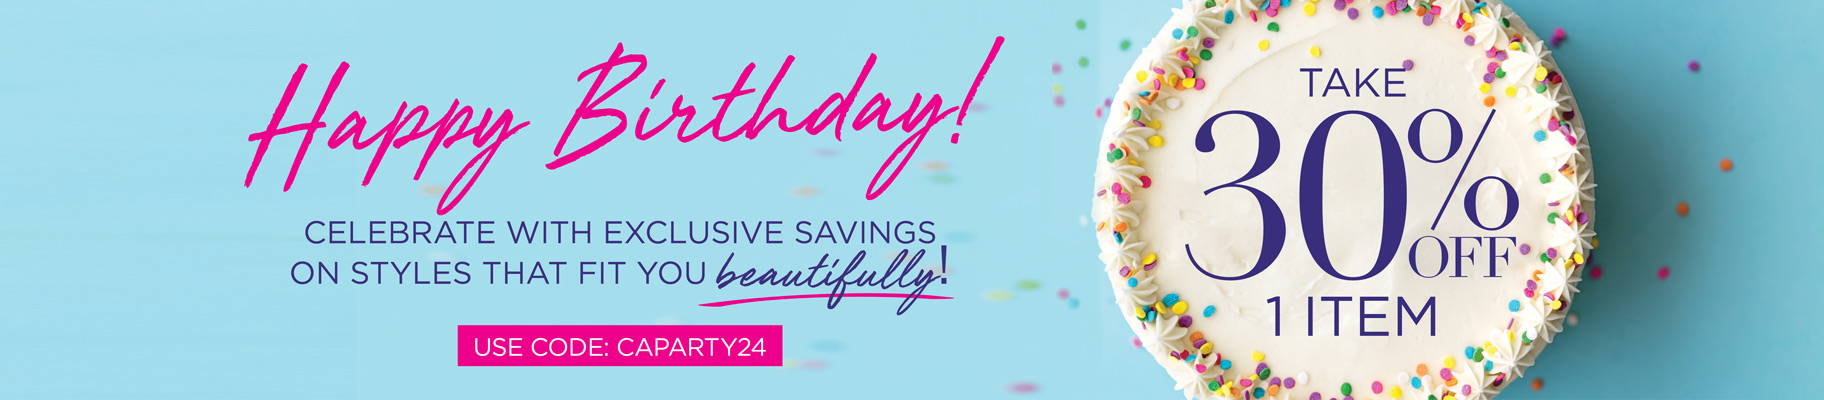 Happy Birthday! Celebrate with exclusive savings on styles that fit you beautifully! Take 30% OFF 1 Item with code: CAPARTY24